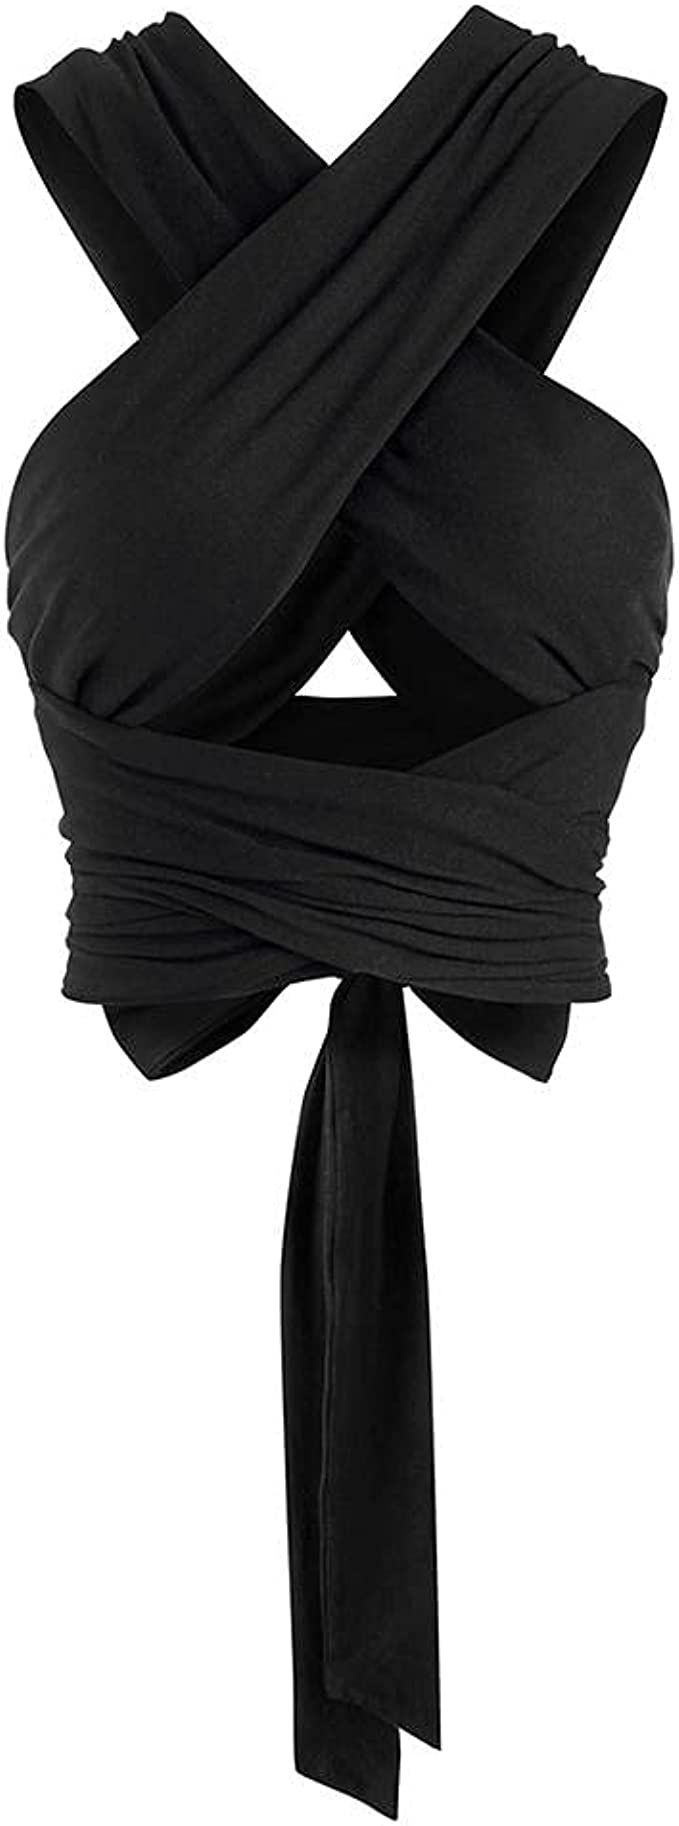 ZAFUL Women's Ribbed Halter Crop Top Criss Cross Ruched Lace-up Cami Bandana Top Cropped Tank Top | Amazon (US)